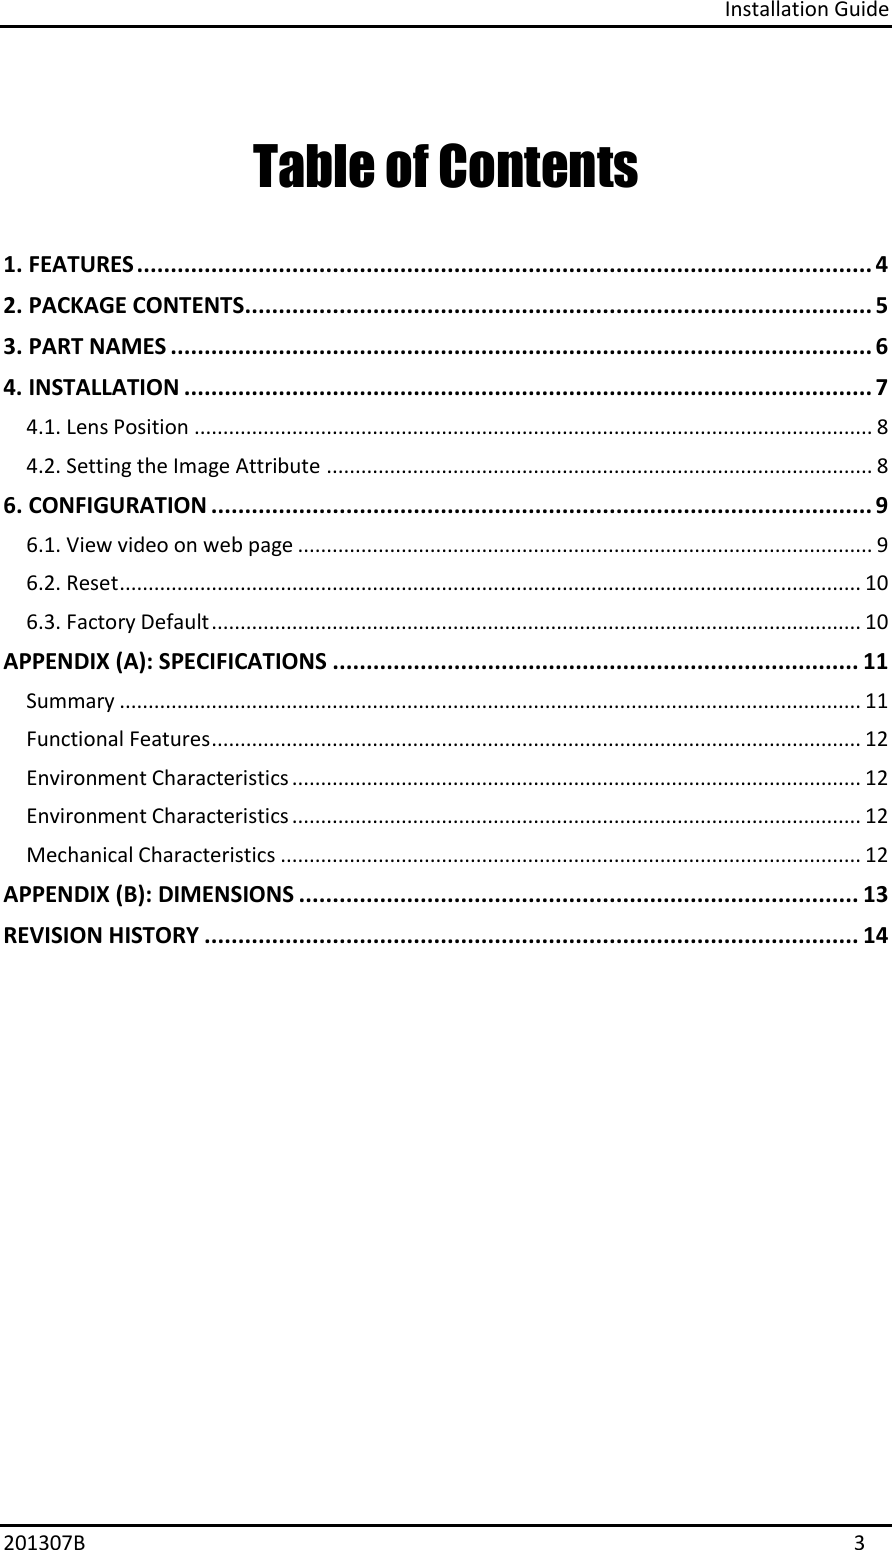 Installation Guide 201307B  3 Table of Contents 1. FEATURES ............................................................................................................. 42. PACKAGE CONTENTS............................................................................................. 53. PART NAMES ........................................................................................................ 64. INSTALLATION ...................................................................................................... 74.1. Lens Position ...................................................................................................................... 8 4.2. Setting the Image Attribute ............................................................................................... 8 6. CONFIGURATION .................................................................................................. 96.1. View video on web page .................................................................................................... 9 6.2. Reset ................................................................................................................................. 10 6.3. Factory Default ................................................................................................................. 10 APPENDIX (A): SPECIFICATIONS .............................................................................. 11 Summary ................................................................................................................................. 11 Functional Features ................................................................................................................. 12 Environment Characteristics ................................................................................................... 12 Environment Characteristics ................................................................................................... 12 Mechanical Characteristics ..................................................................................................... 12 APPENDIX (B): DIMENSIONS ................................................................................... 13 REVISION HISTORY ................................................................................................. 14 